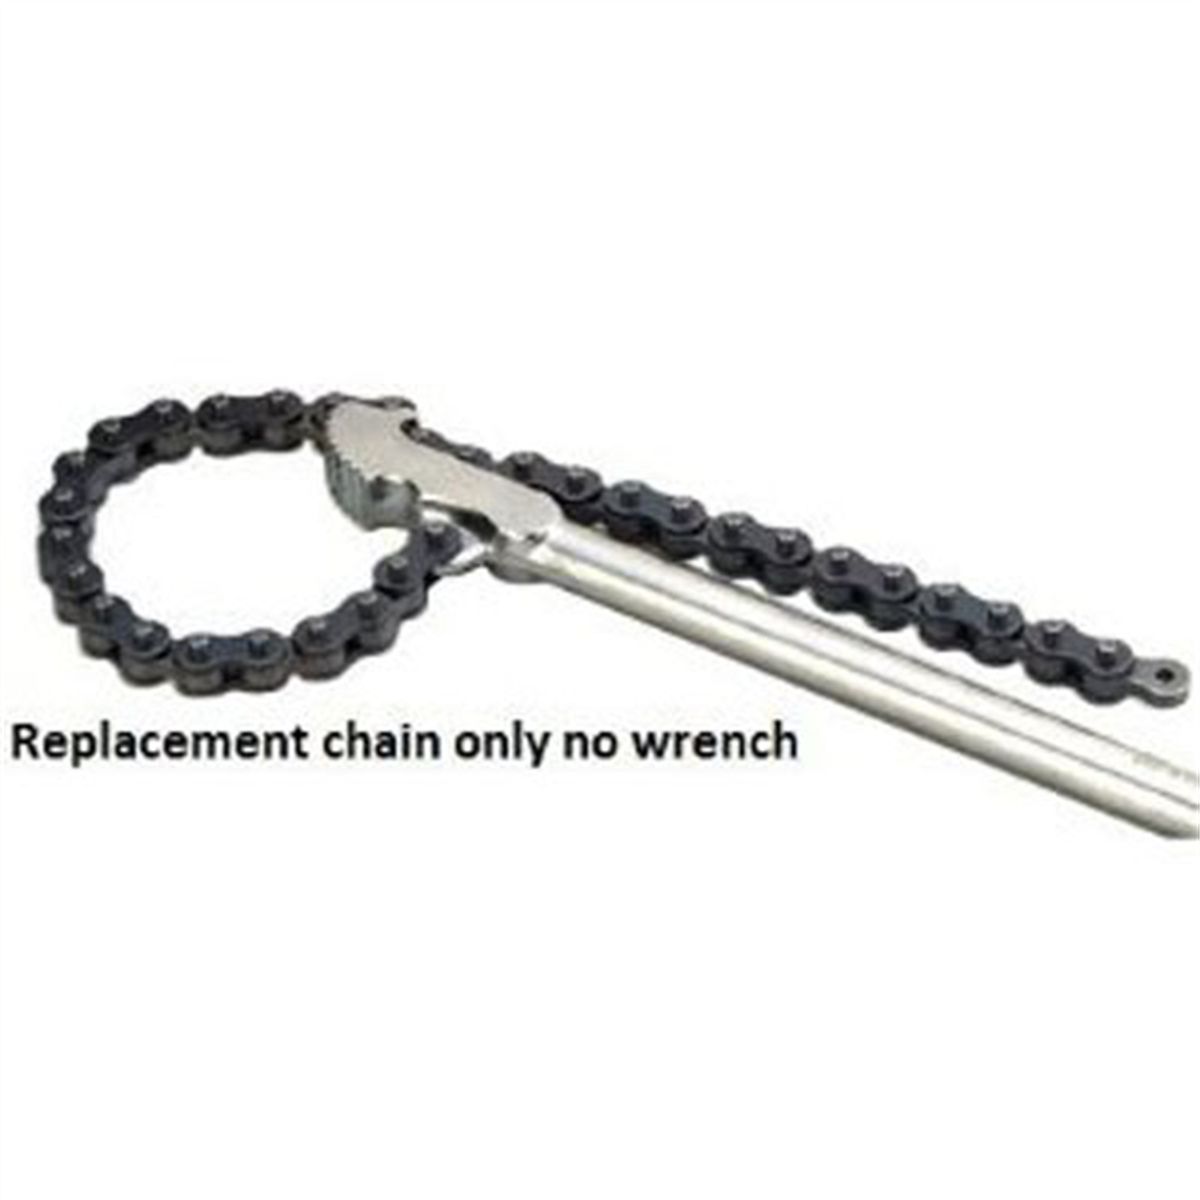 CHAIN FOR OTC7401 CHAIN WRENCH new in box